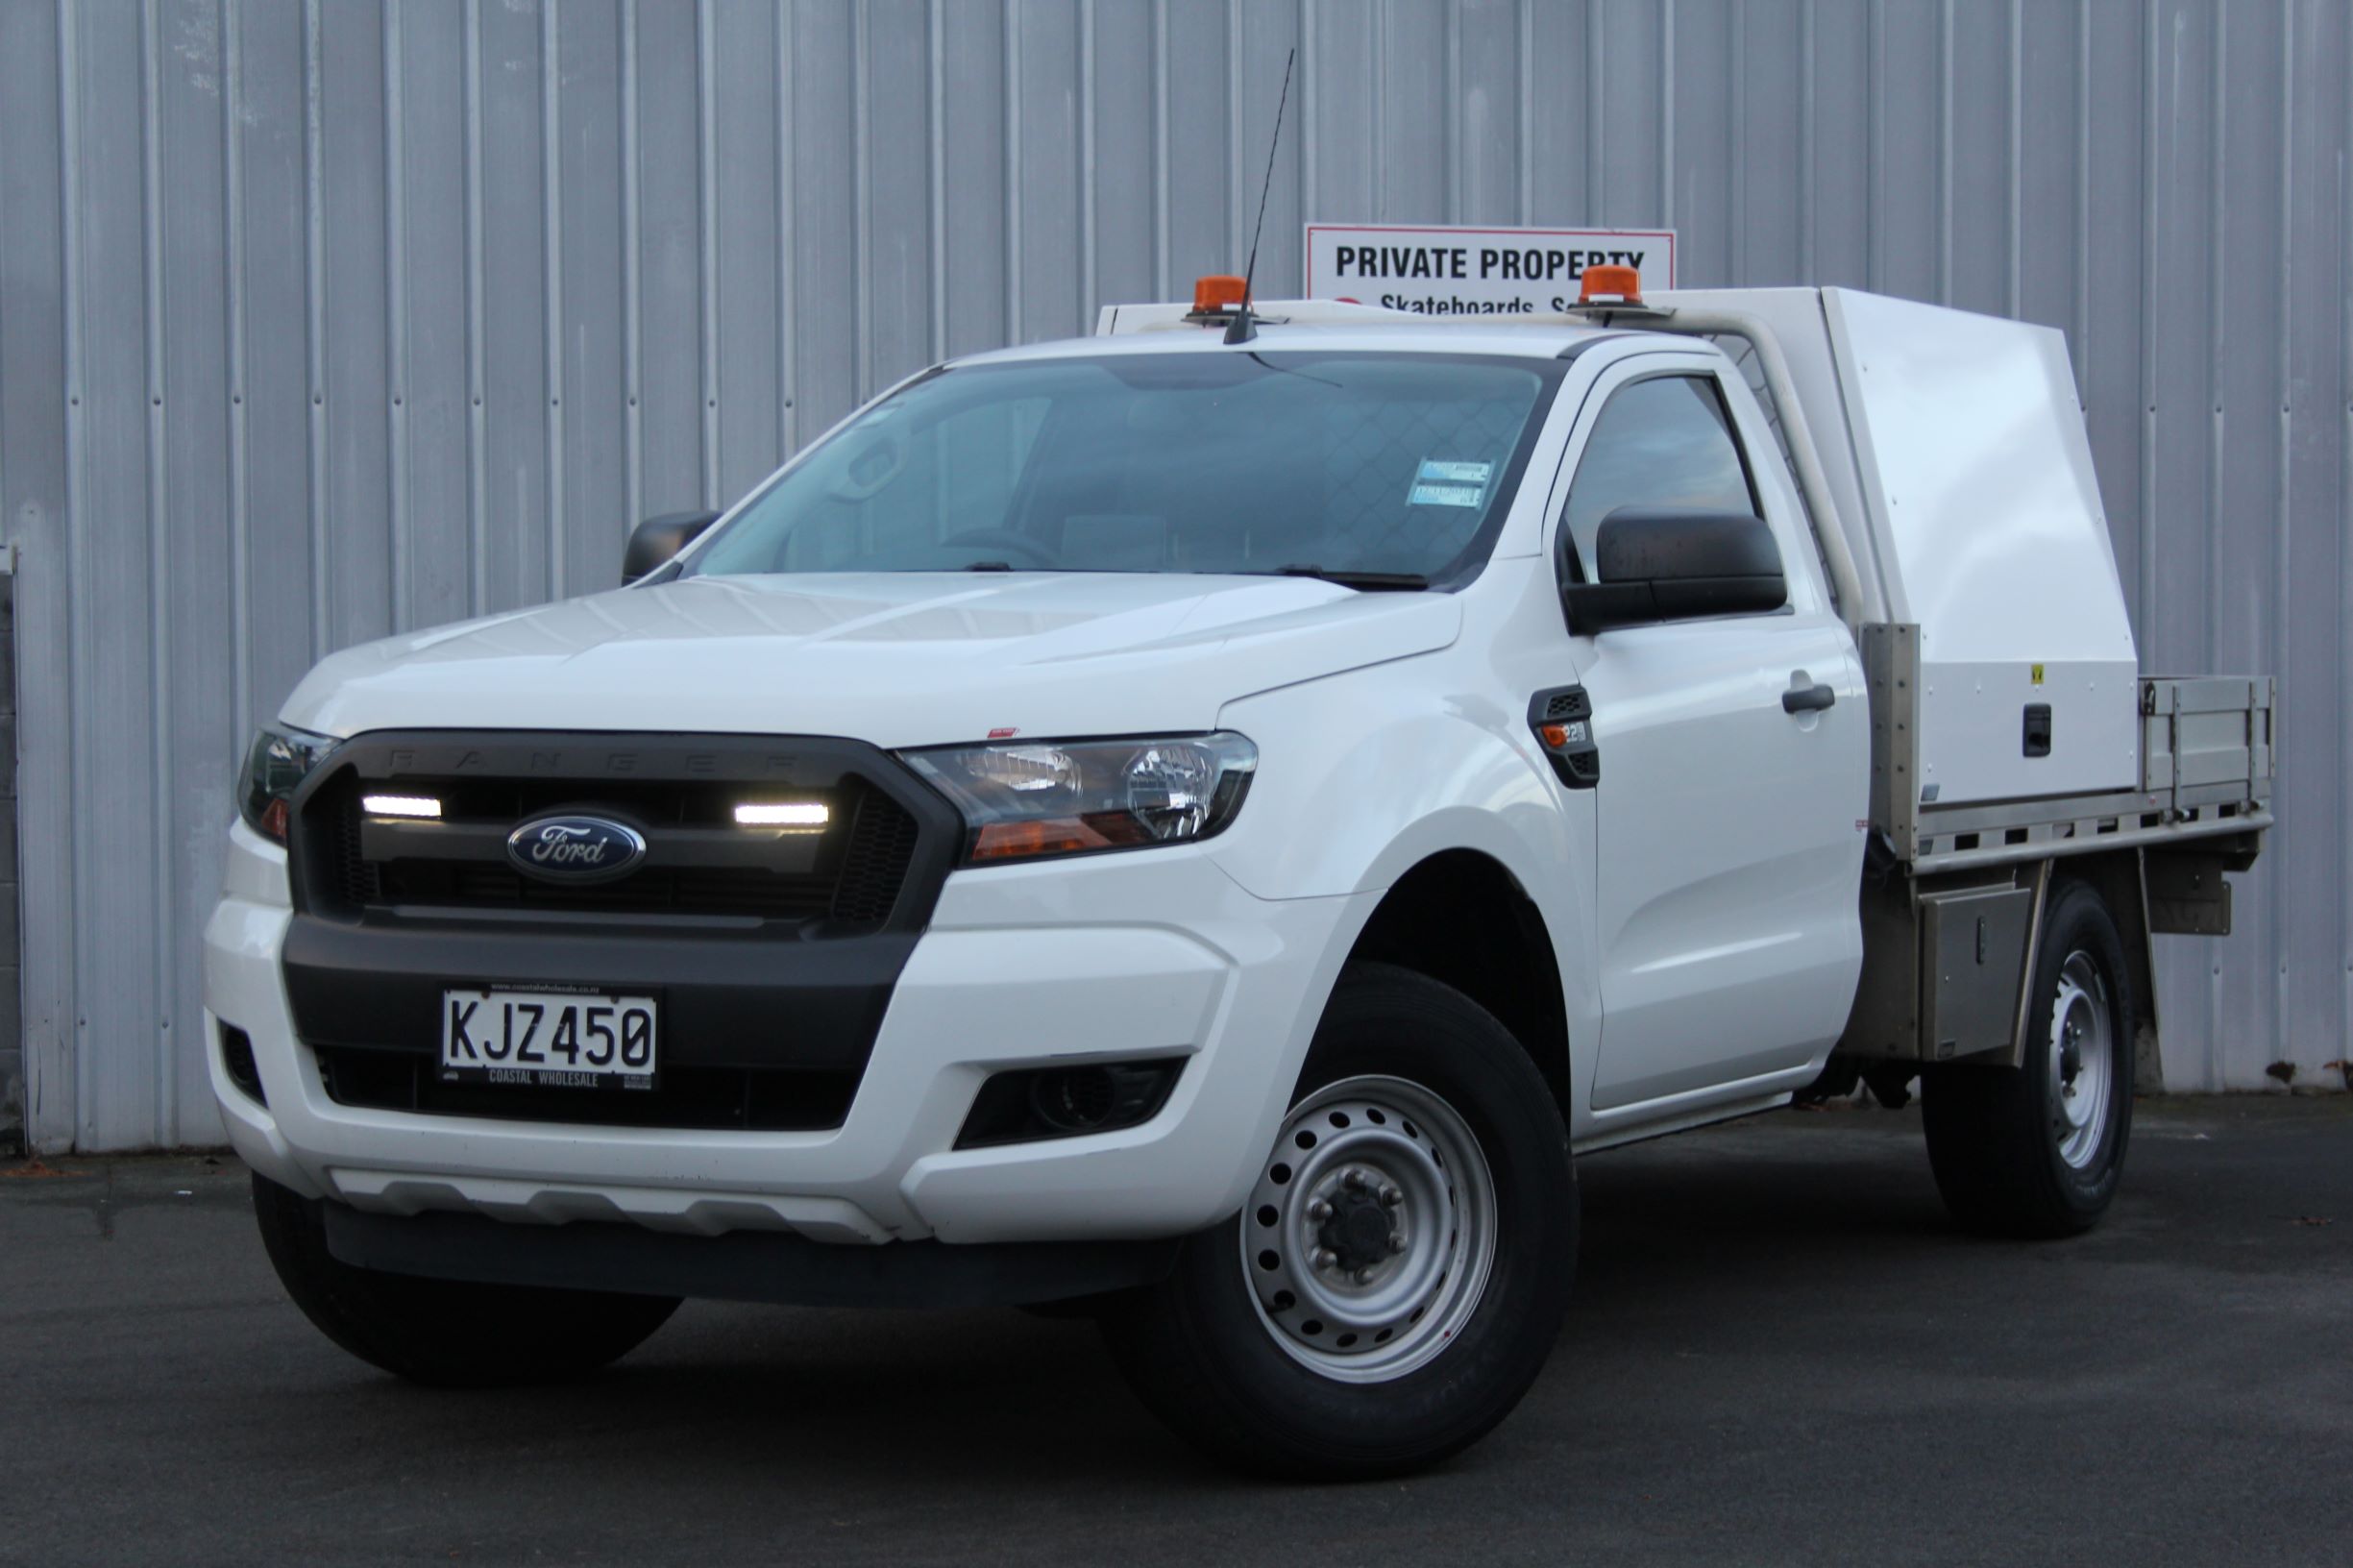 Ford RANGER CAMCO TOOL BOX 2017 for sale in Auckland